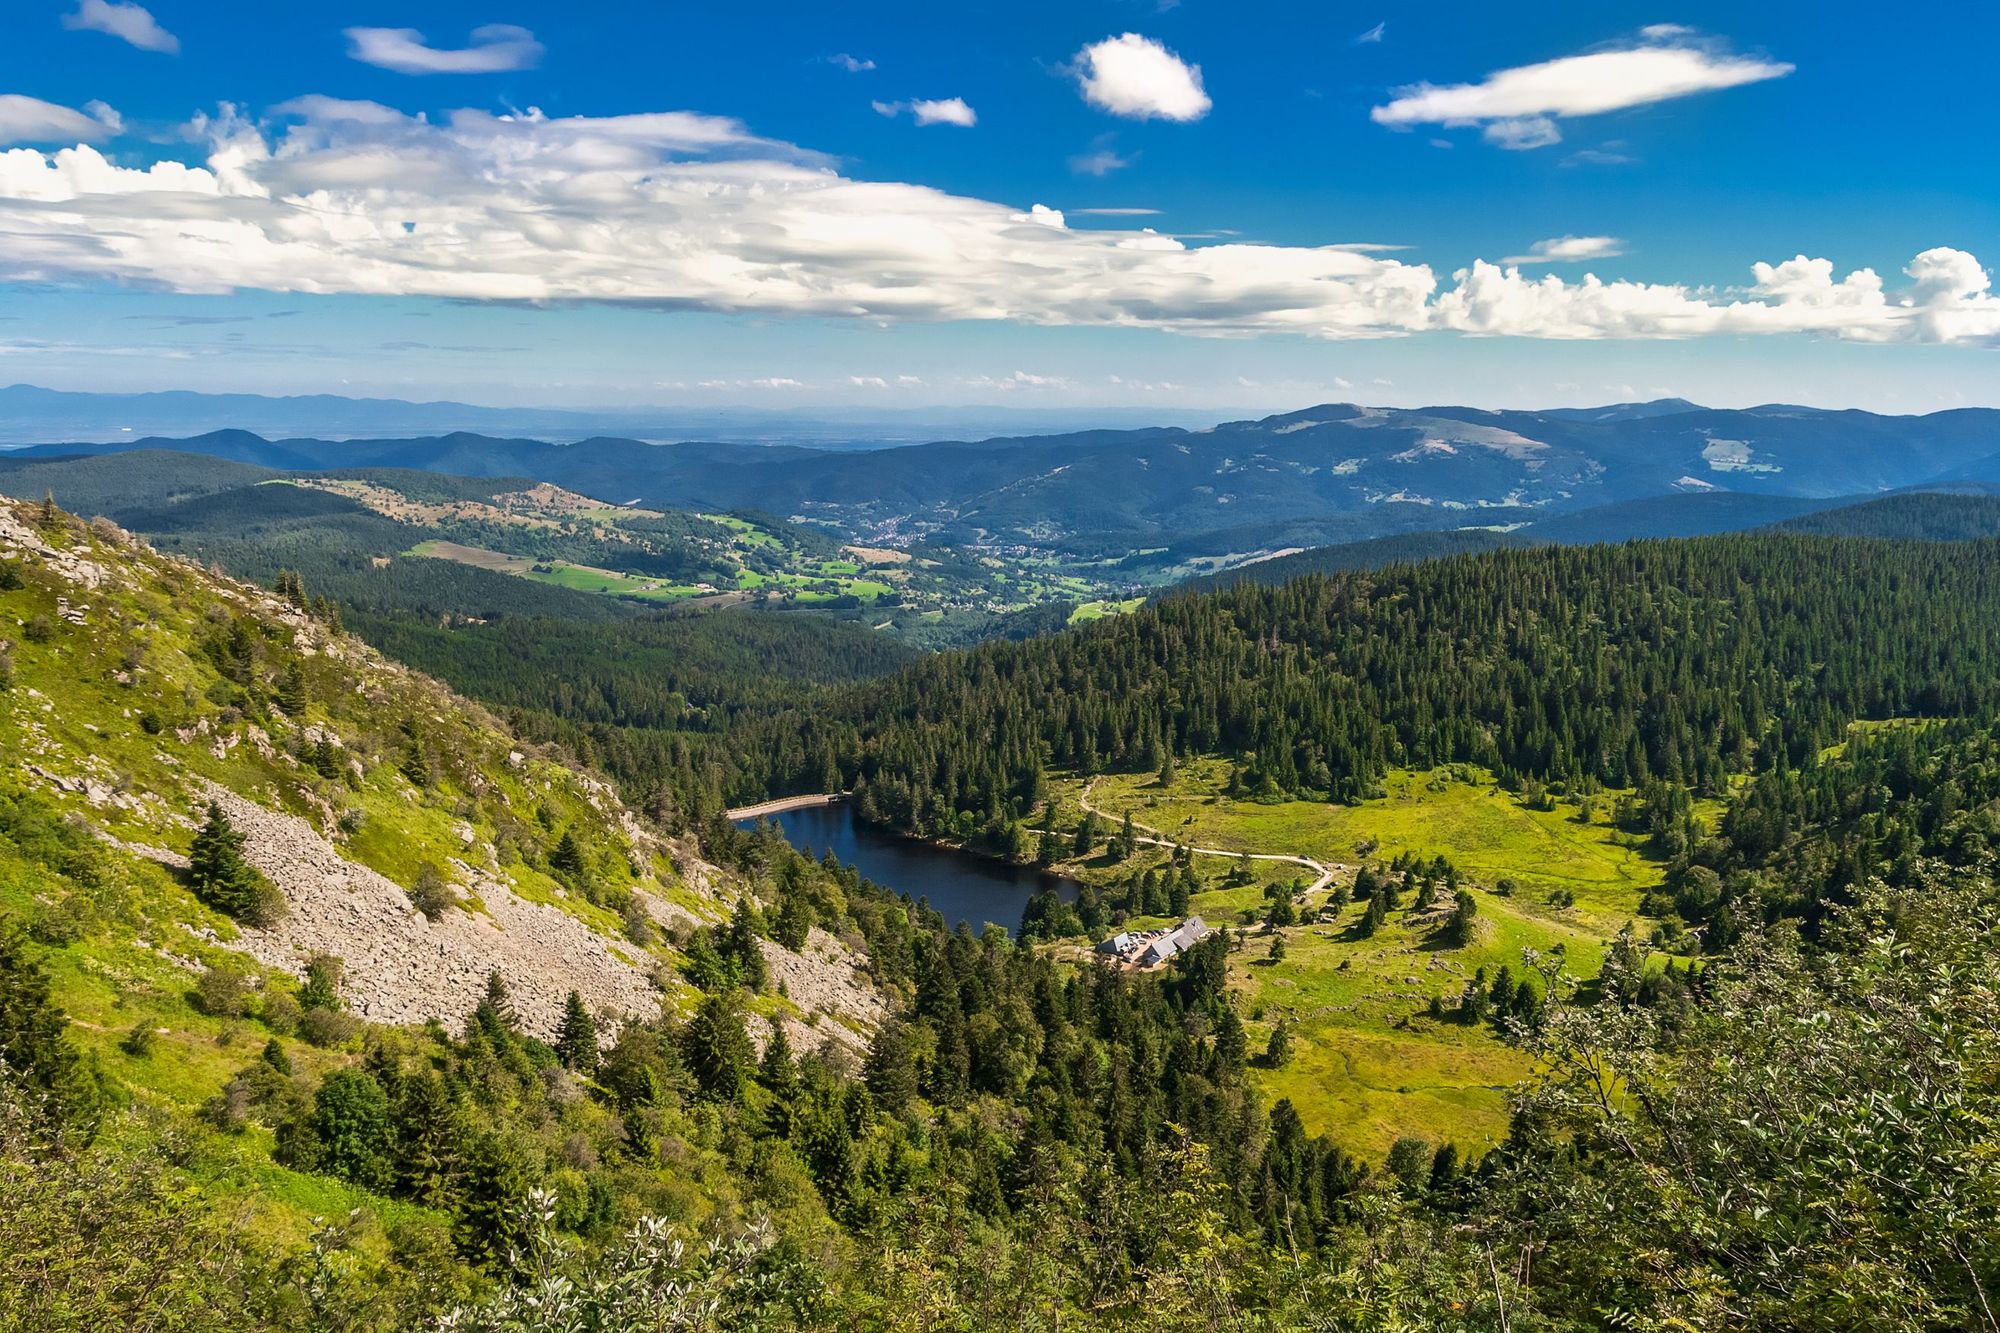  Looking down from the Gazon du Faing on the Forlet Lake in the Vosges Mountains in summer. 